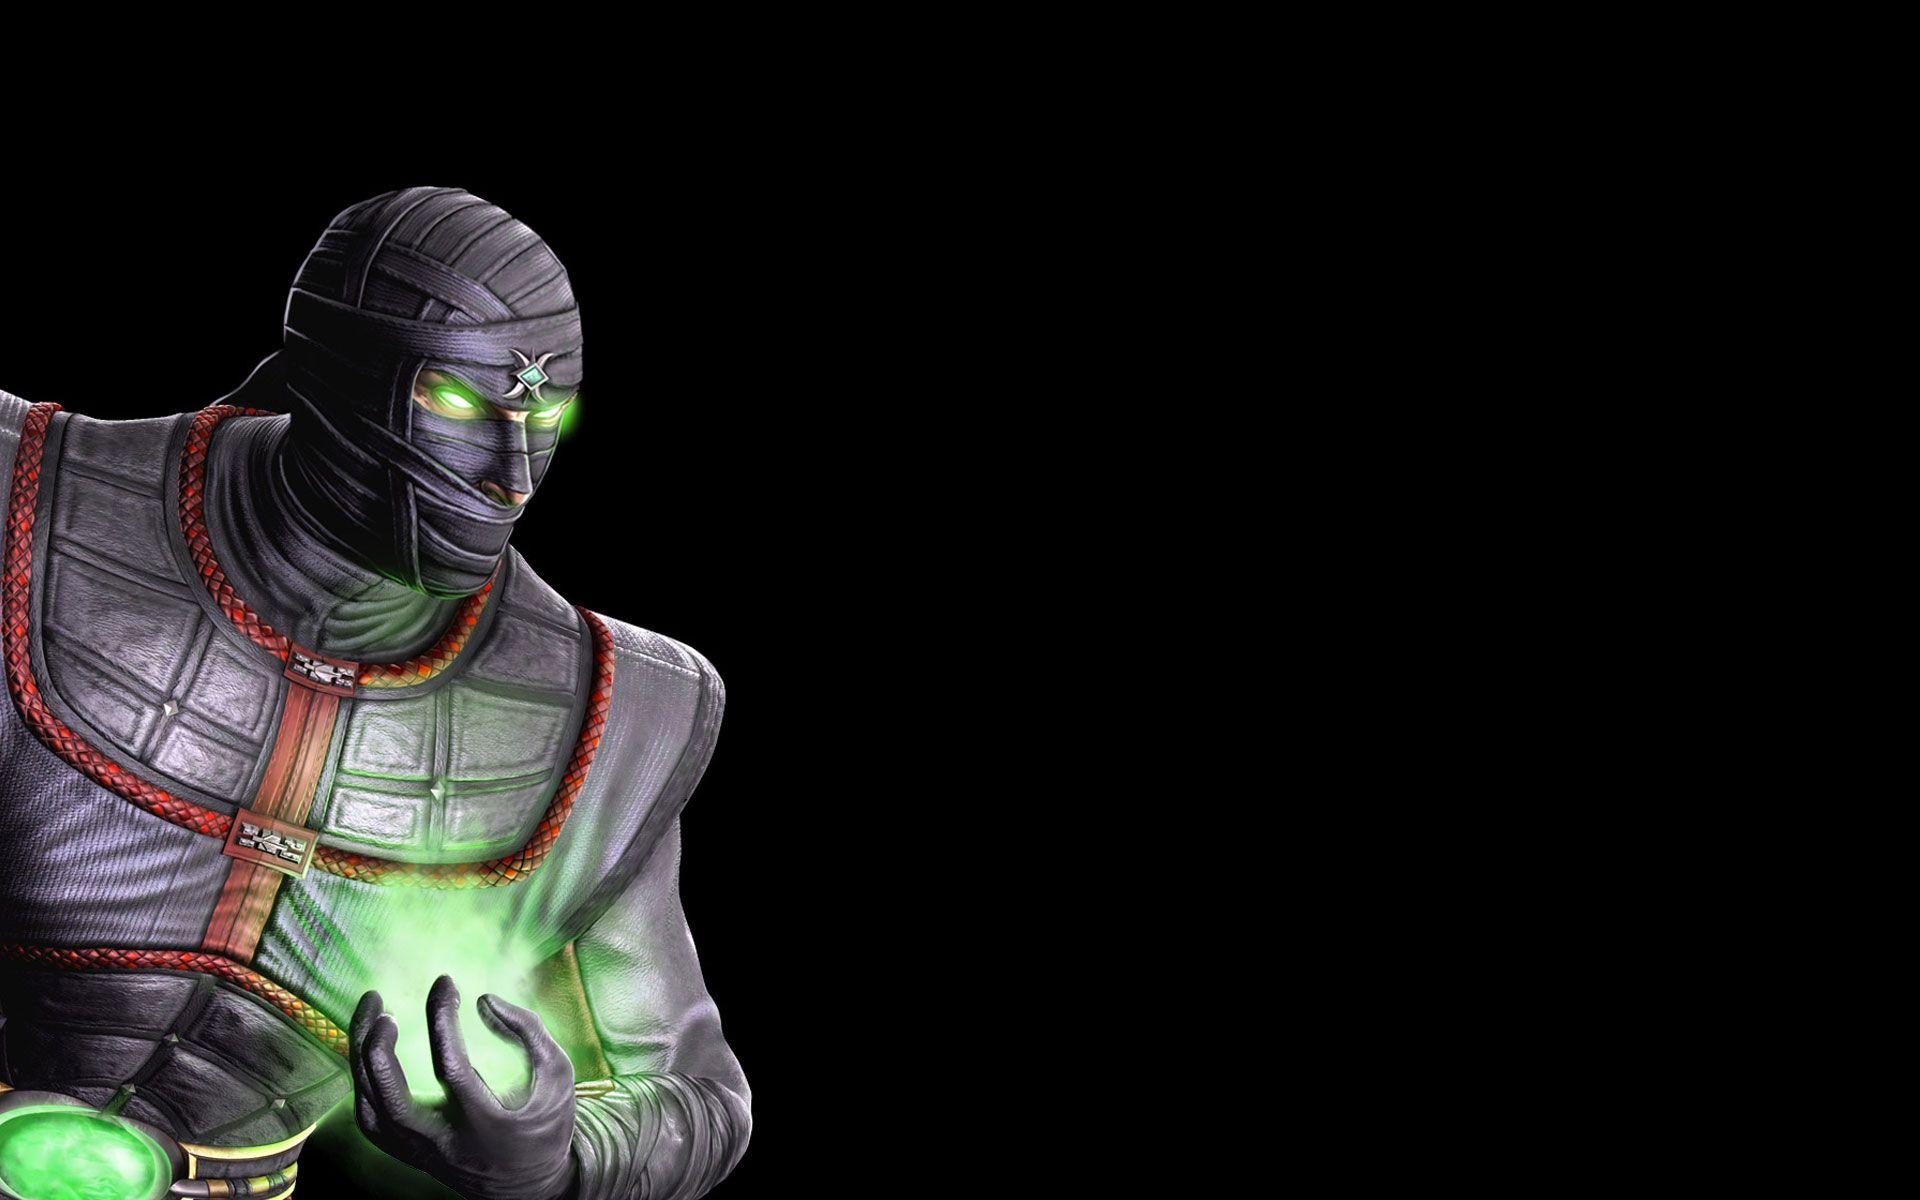 Download the Ermac Wallpaper, Ermac iPhone Wallpaper, Ermac Android